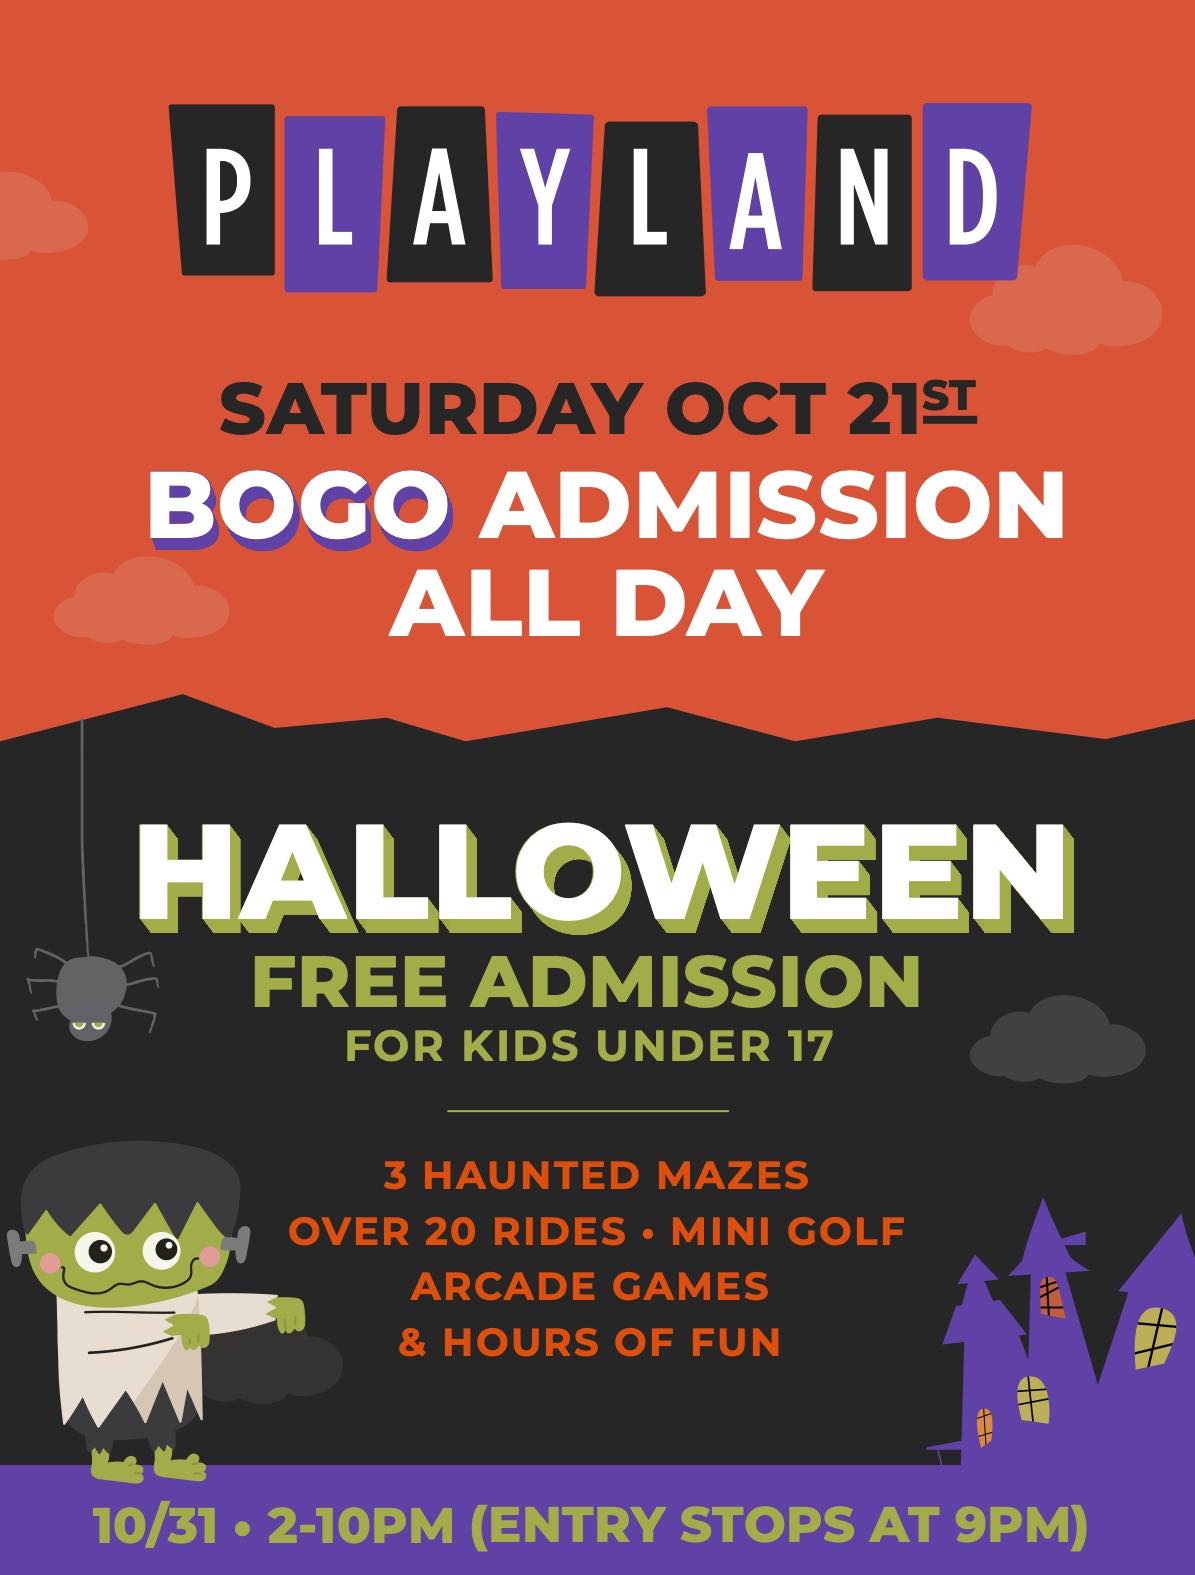 SATURDAY OCT 21 - BOGO ADMISSION ALL DAY. HALLOWEEN DAY - FREE ADMISSION FOR KIDS UNDER 17. 3 HAUNTED MAZES. OVER 20 RIDES MINI GOLF, ARCADE GAMES, AND HOURS OF FUN 2-10PM (ENTRY STOPS AT 9PM. )